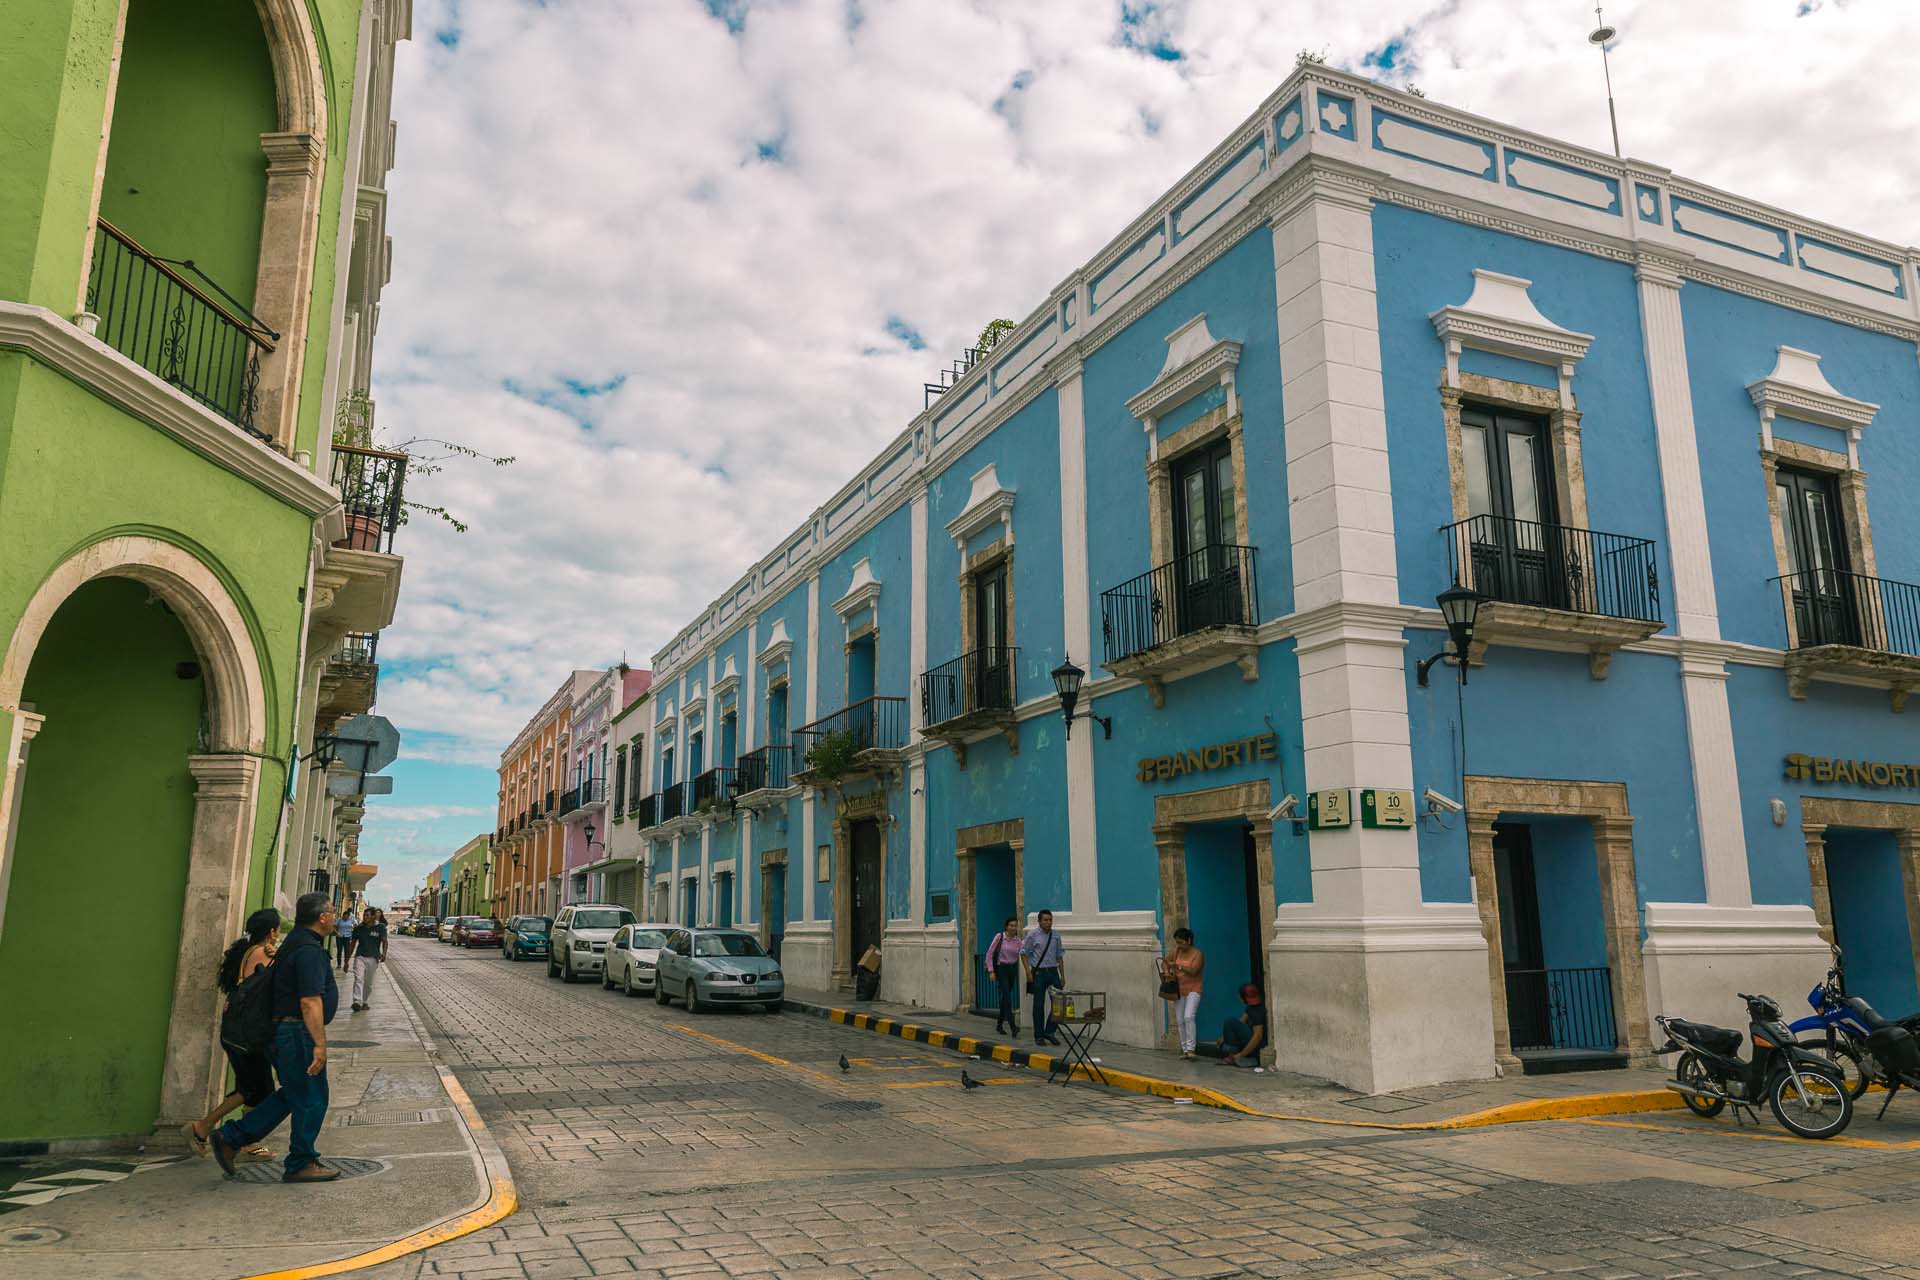 The city is filled with colonial architecture.